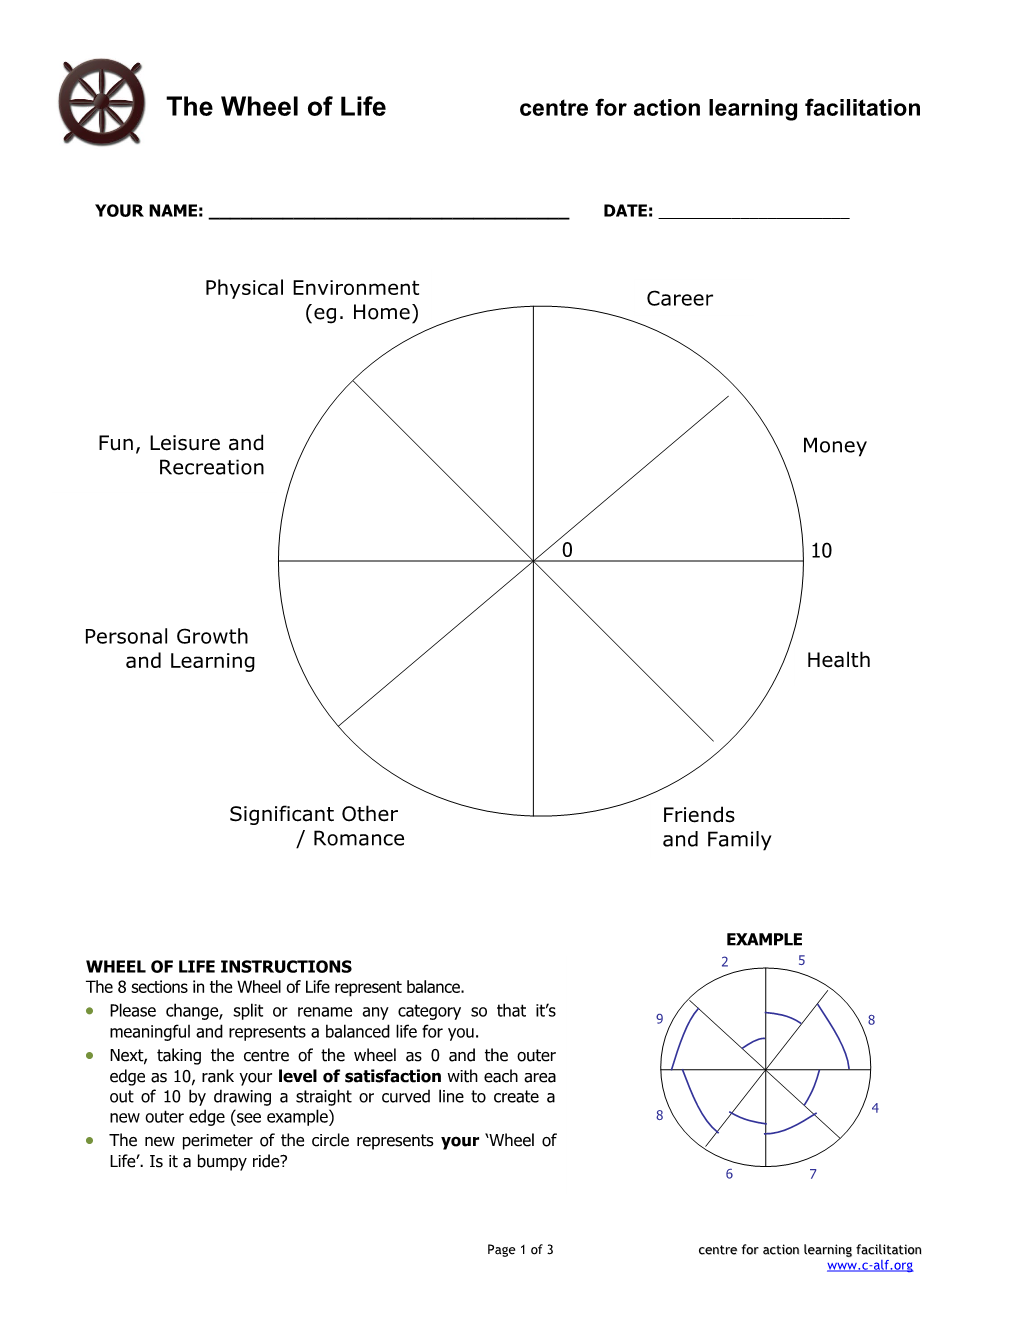 Wheel of Life with Instructions